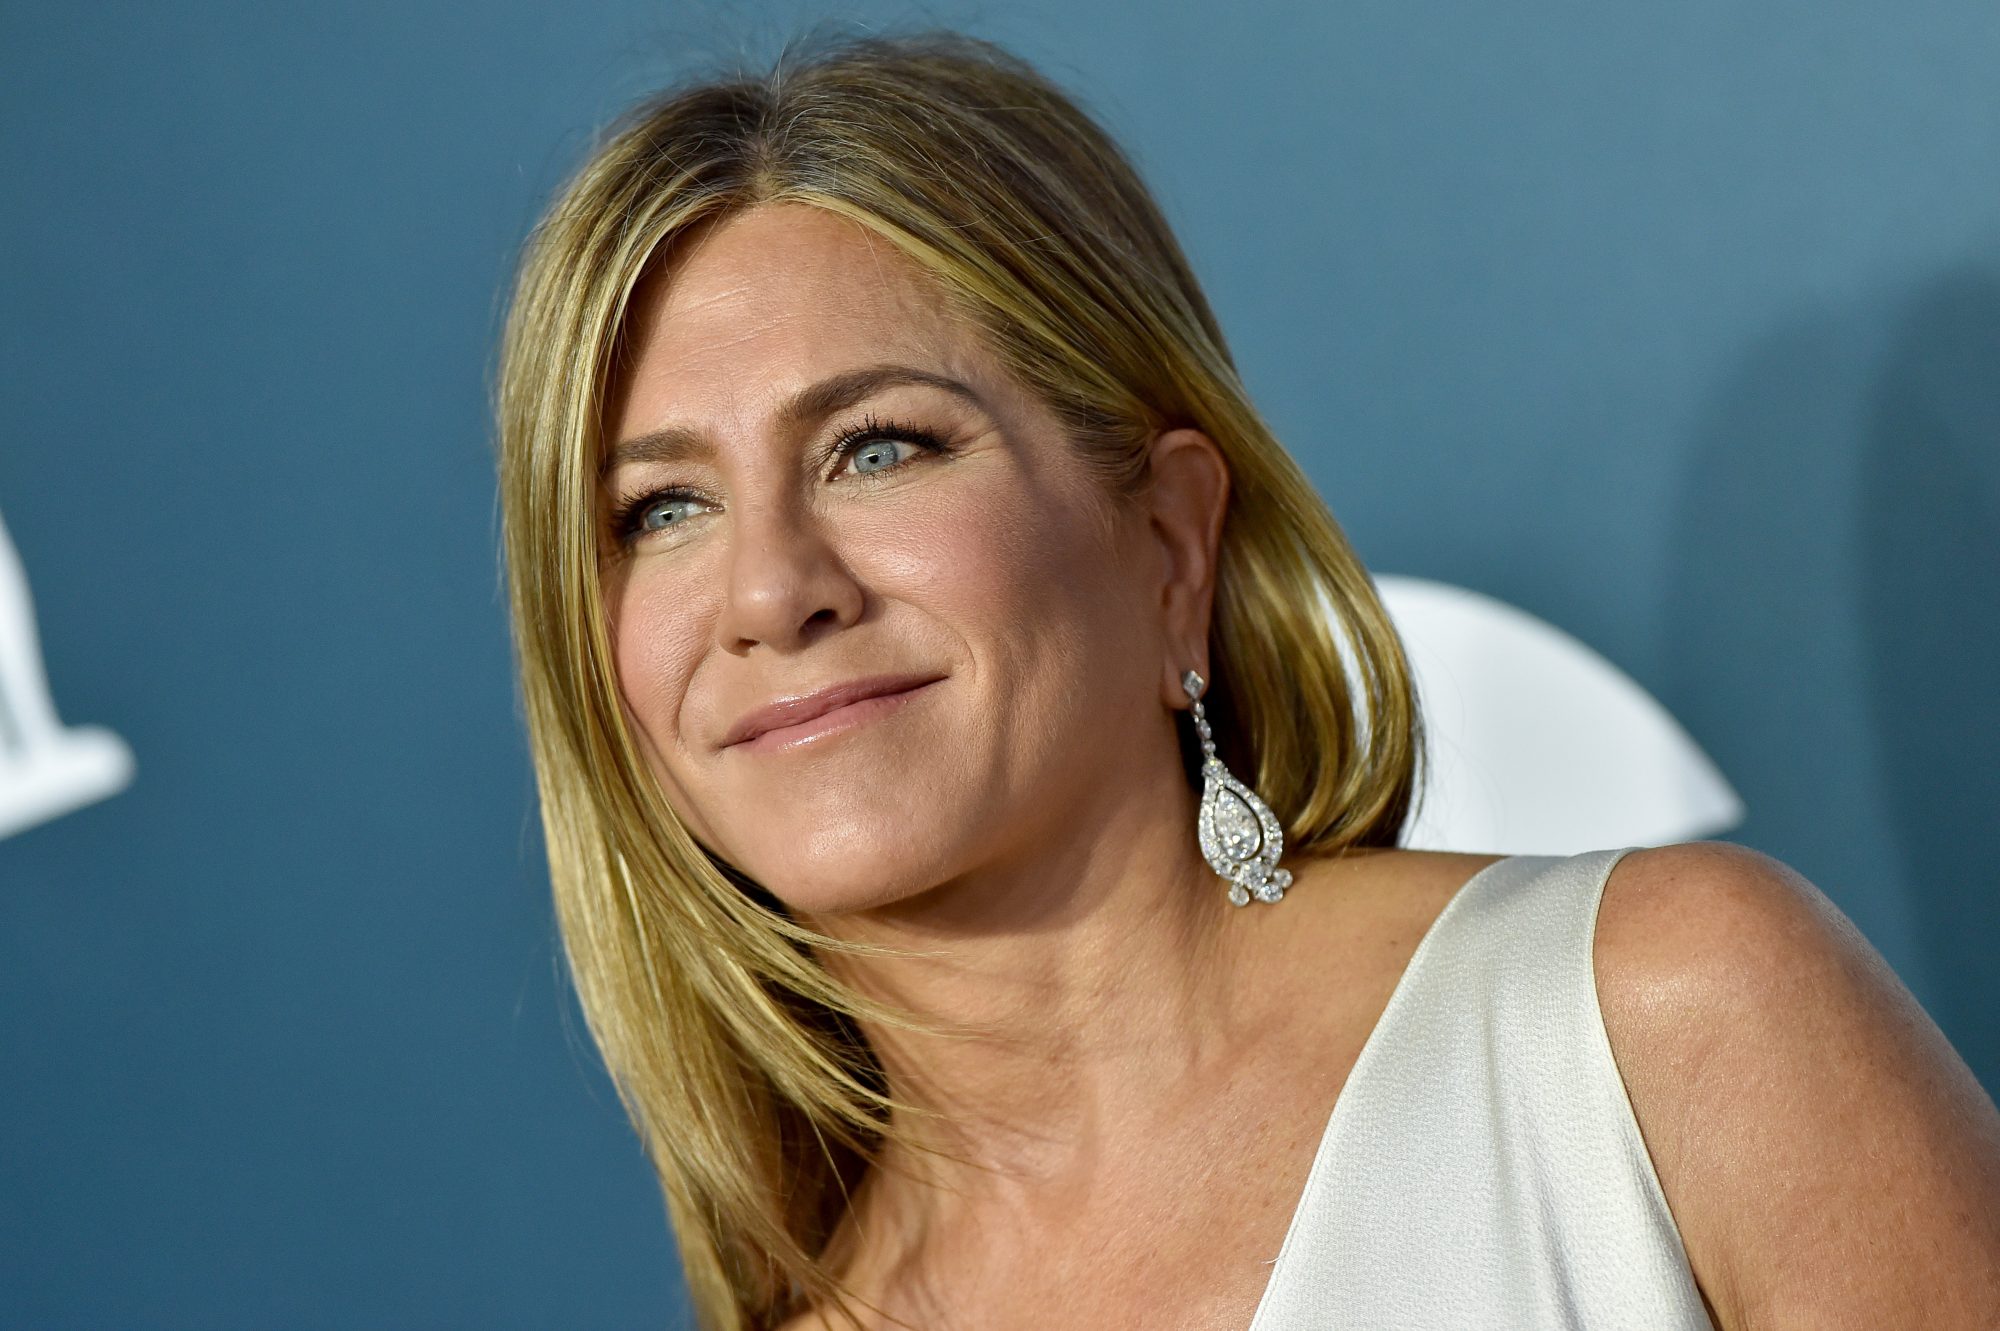 Jennifer Aniston Said She Wants to Always Be Remembered for Making People LaughHelloGiggles photo